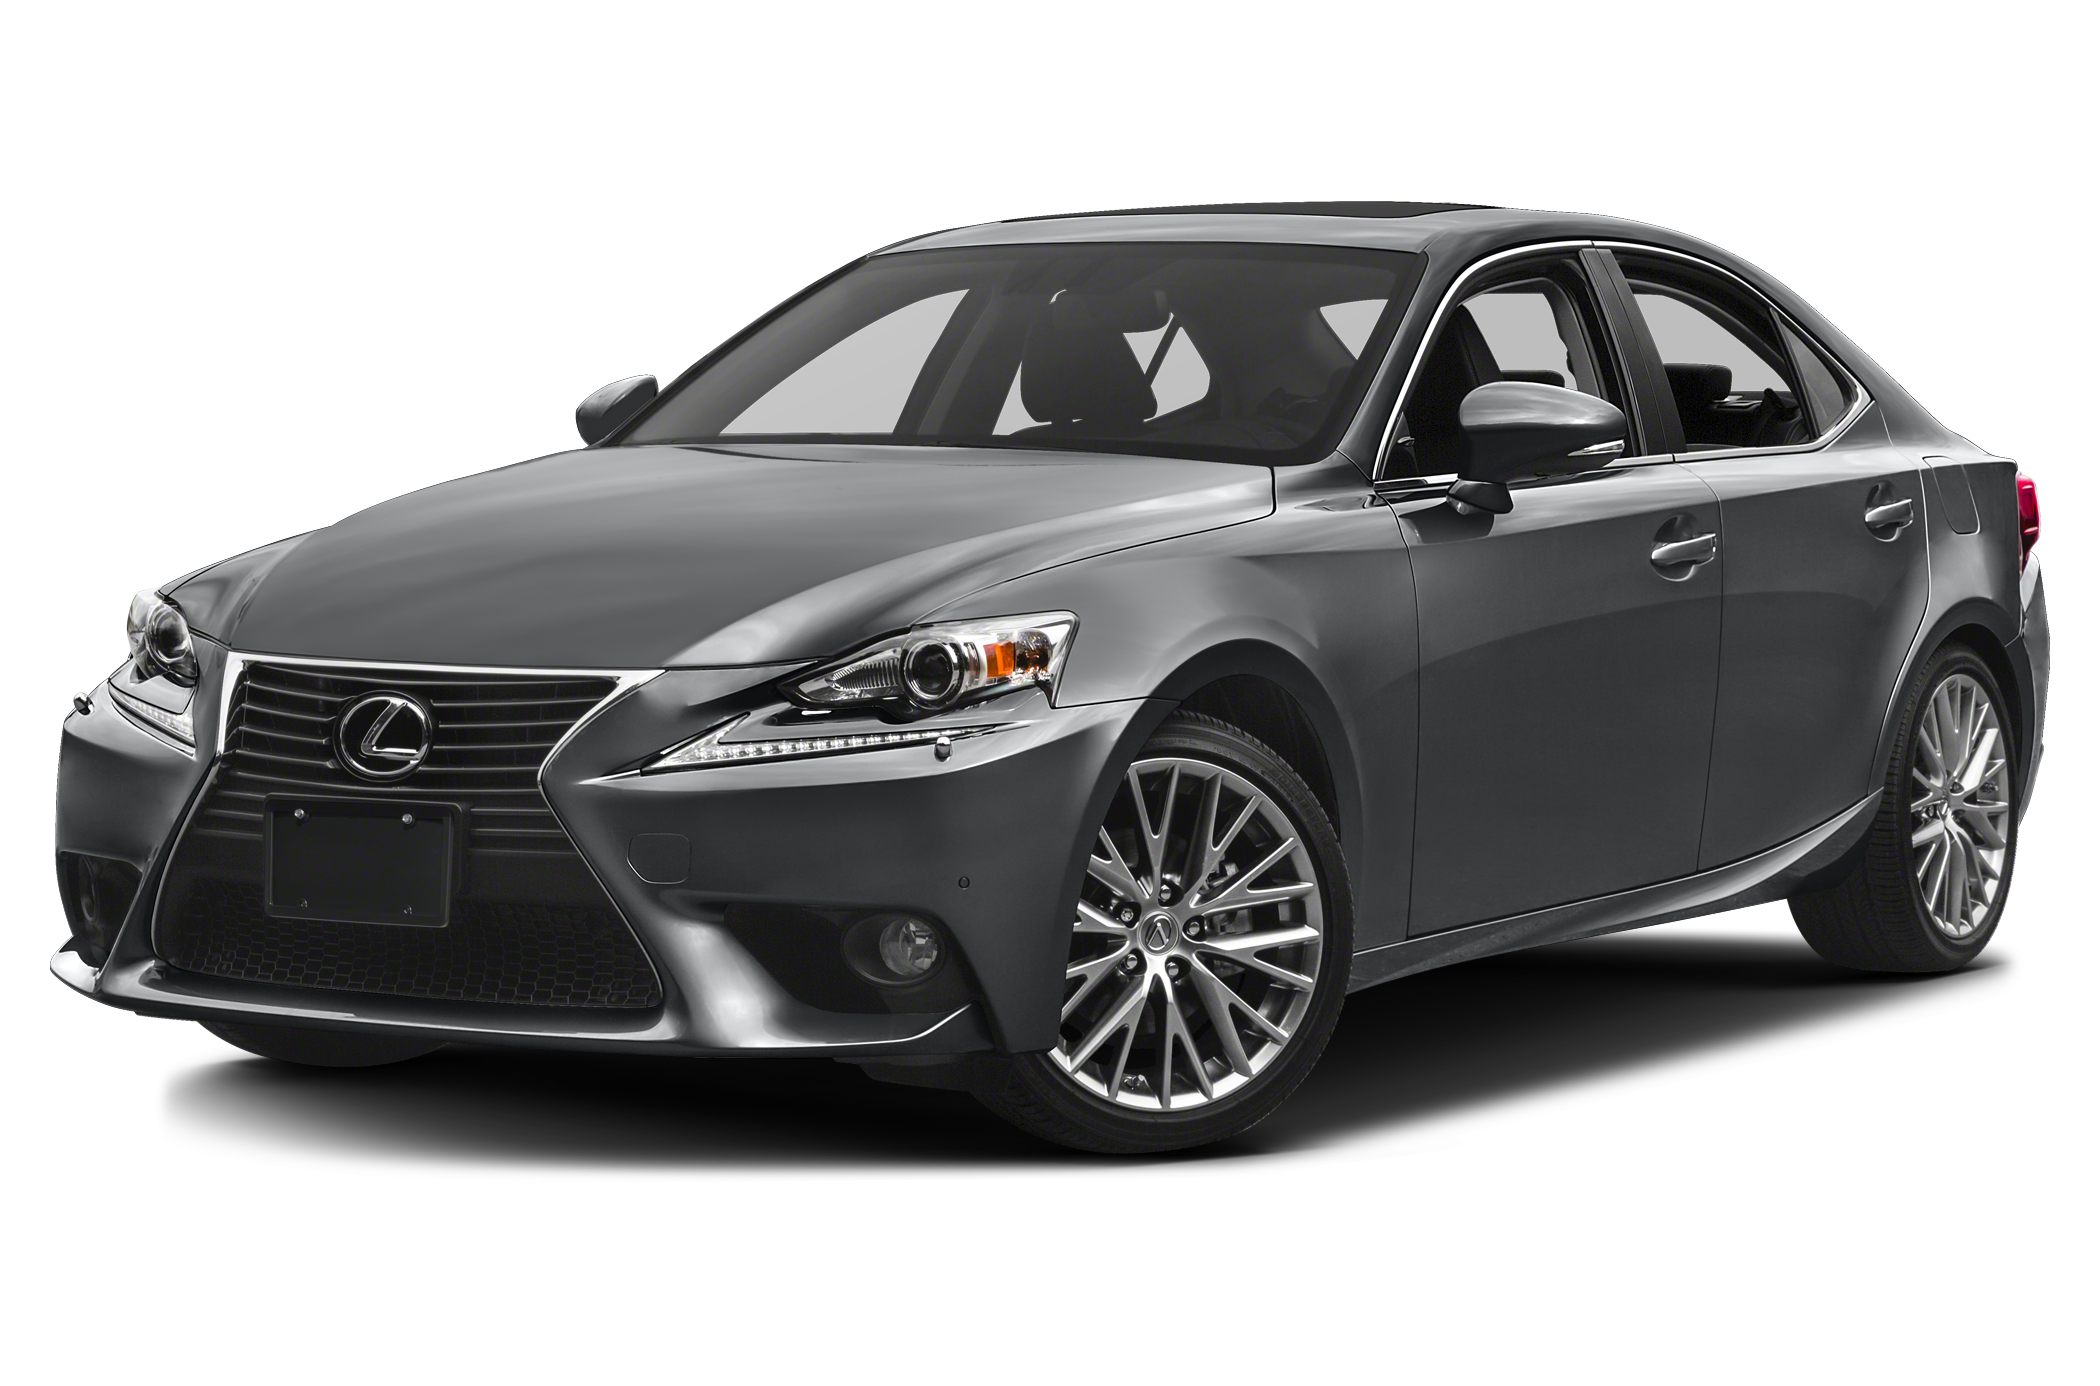 Lexus IS 250 Prices, Reviews and New Model Information